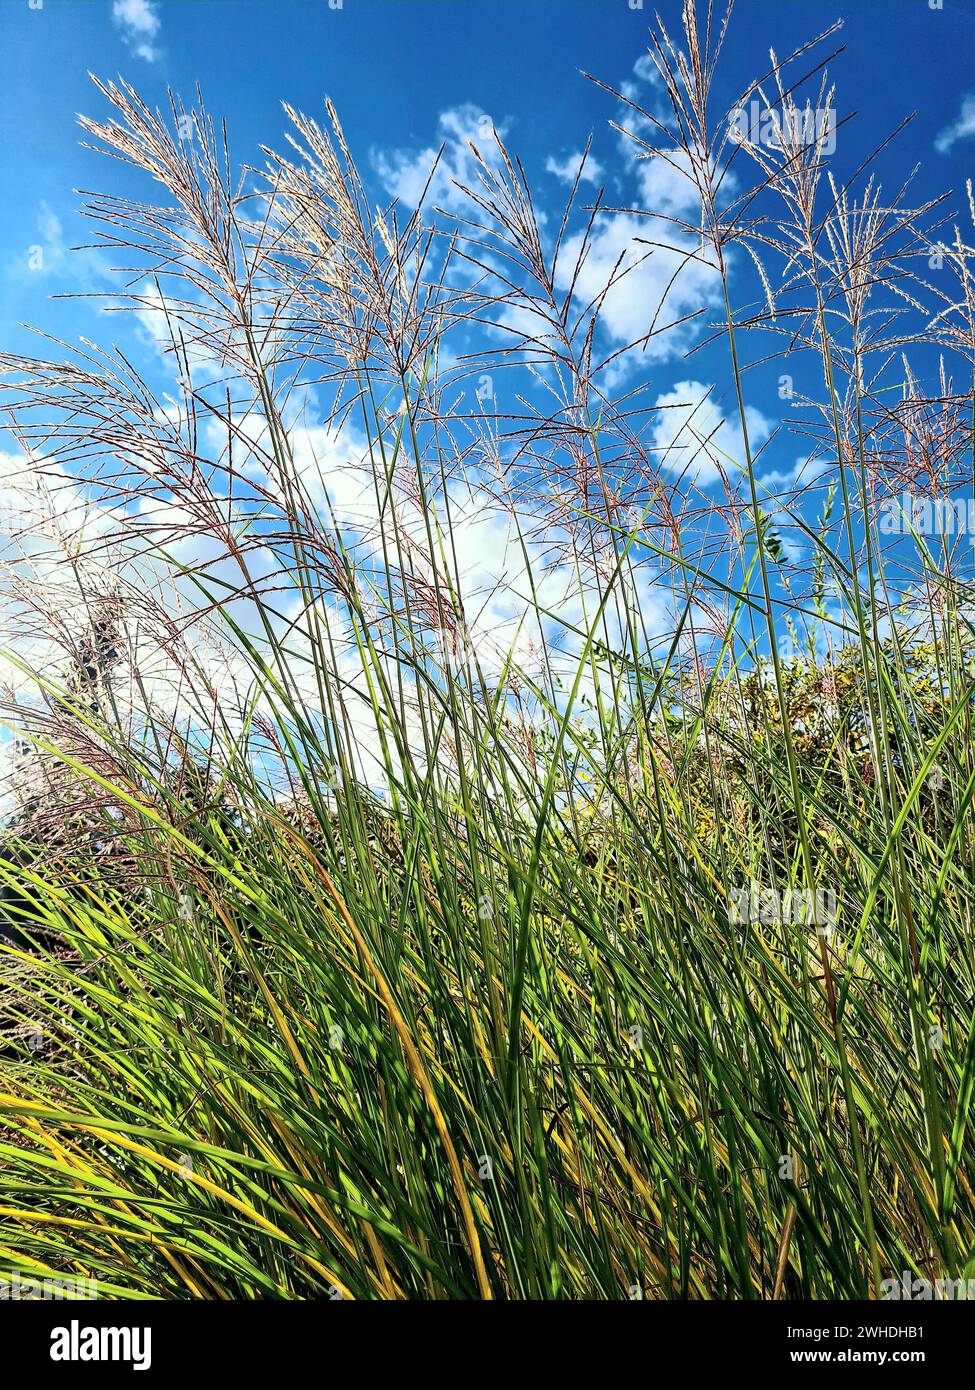 Outdoor shot with blue sky on the horizon with feather grass and grasses in the foreground Stock Photo